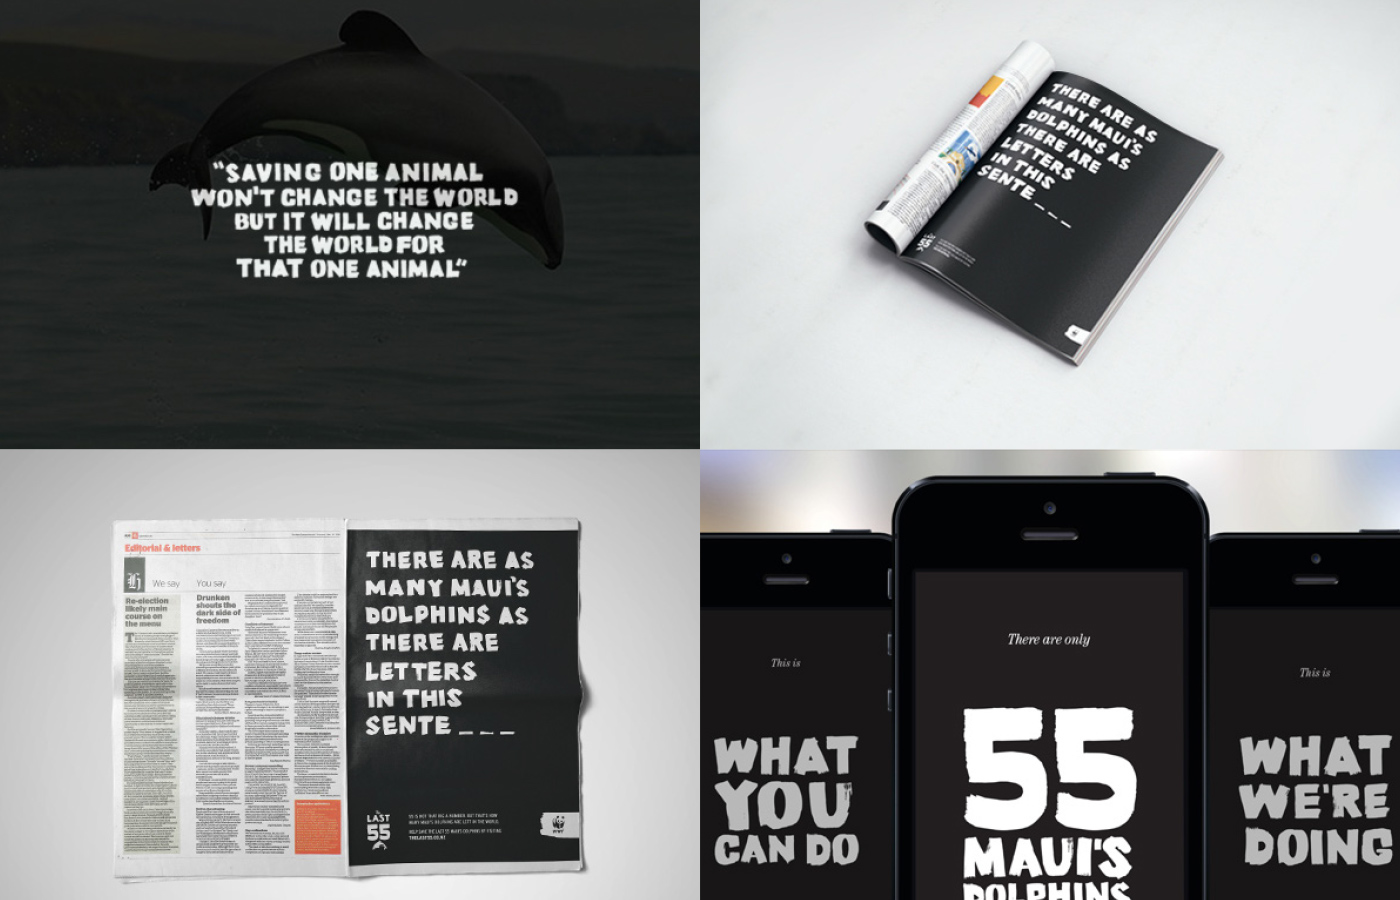 485 Design The Last 55 maui's dolphin Typeface poster campaign Graphic Design NZ New Zealand